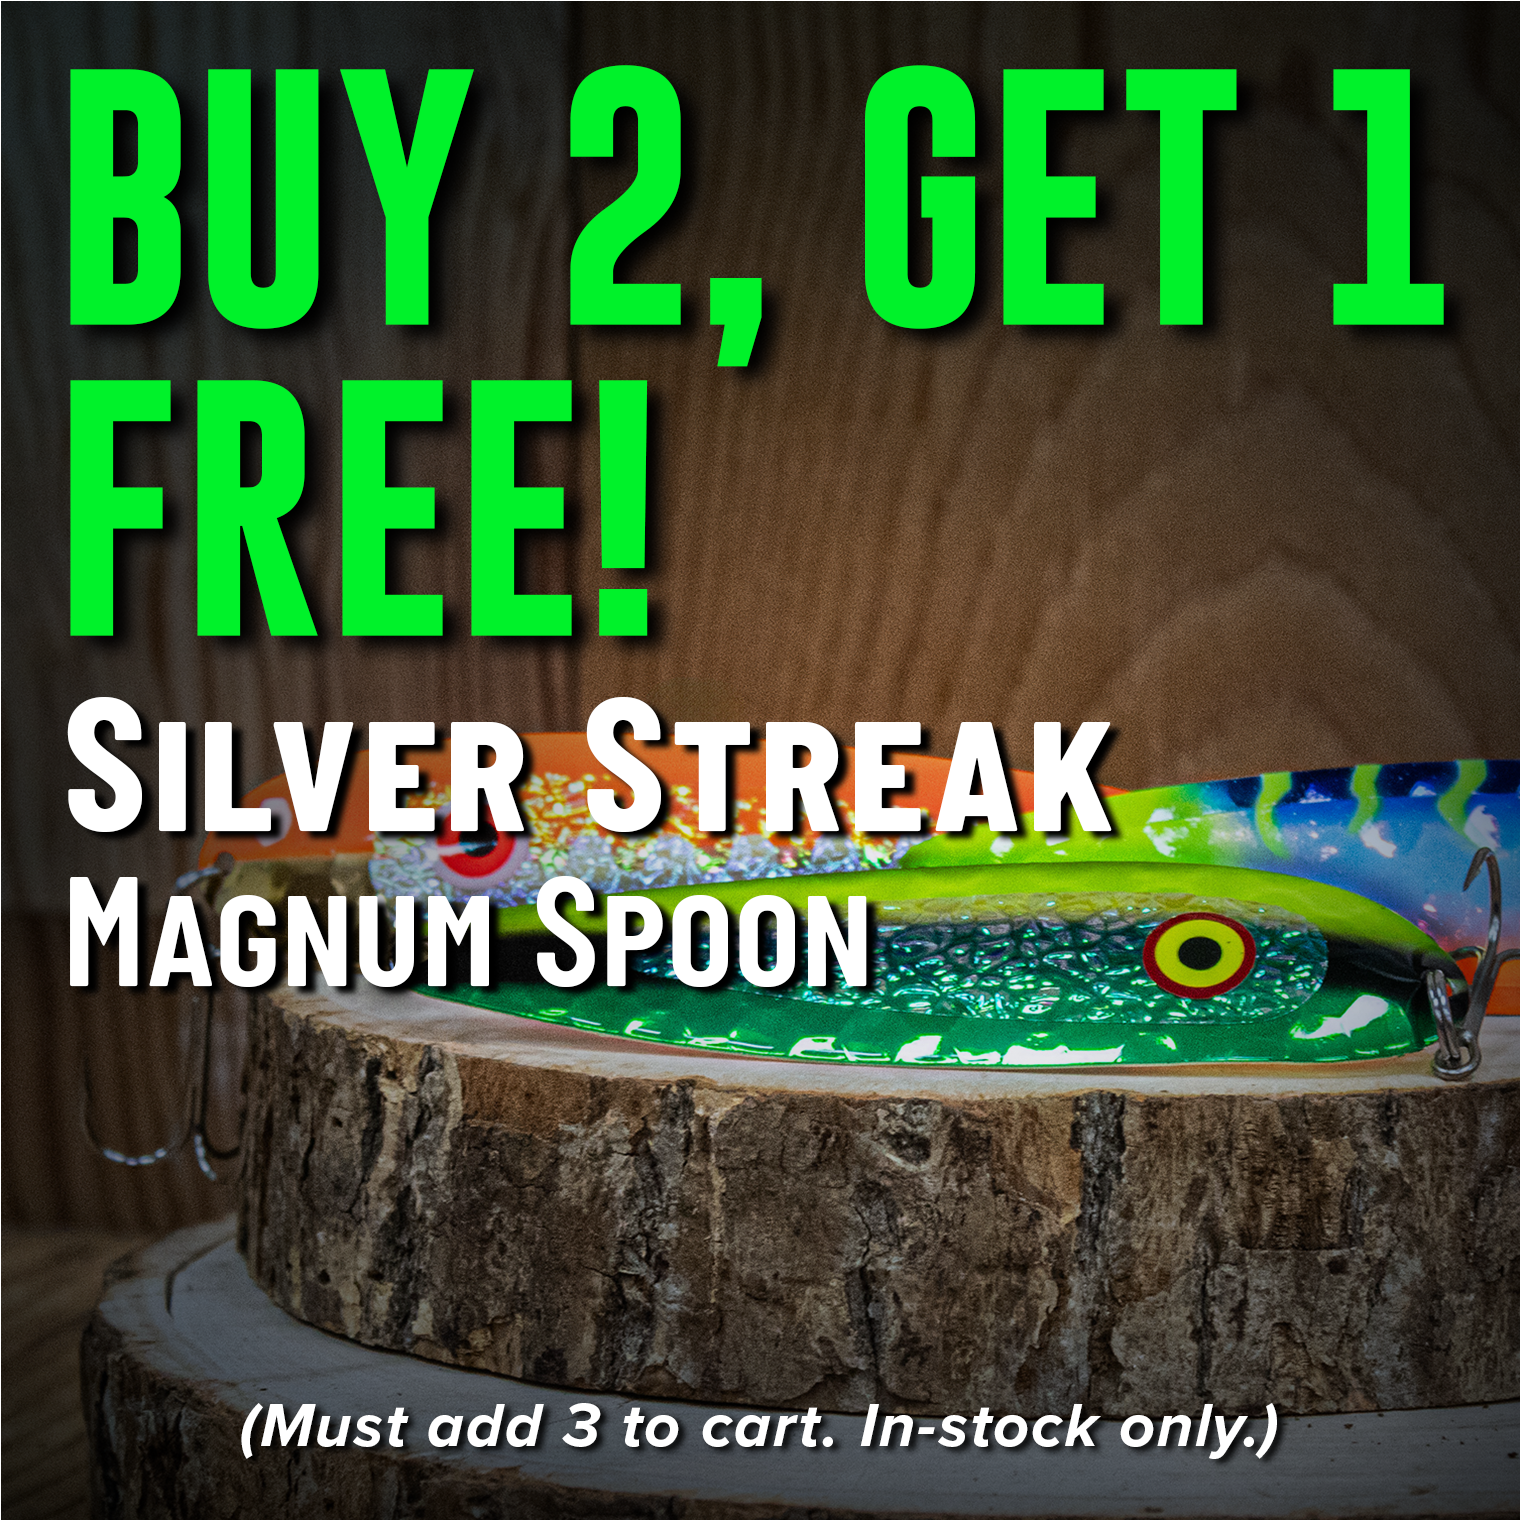 Buy 2, Get 1 Free! Silver Streak Magnum Spoon (Must add 3 to cart. In-stock only.)